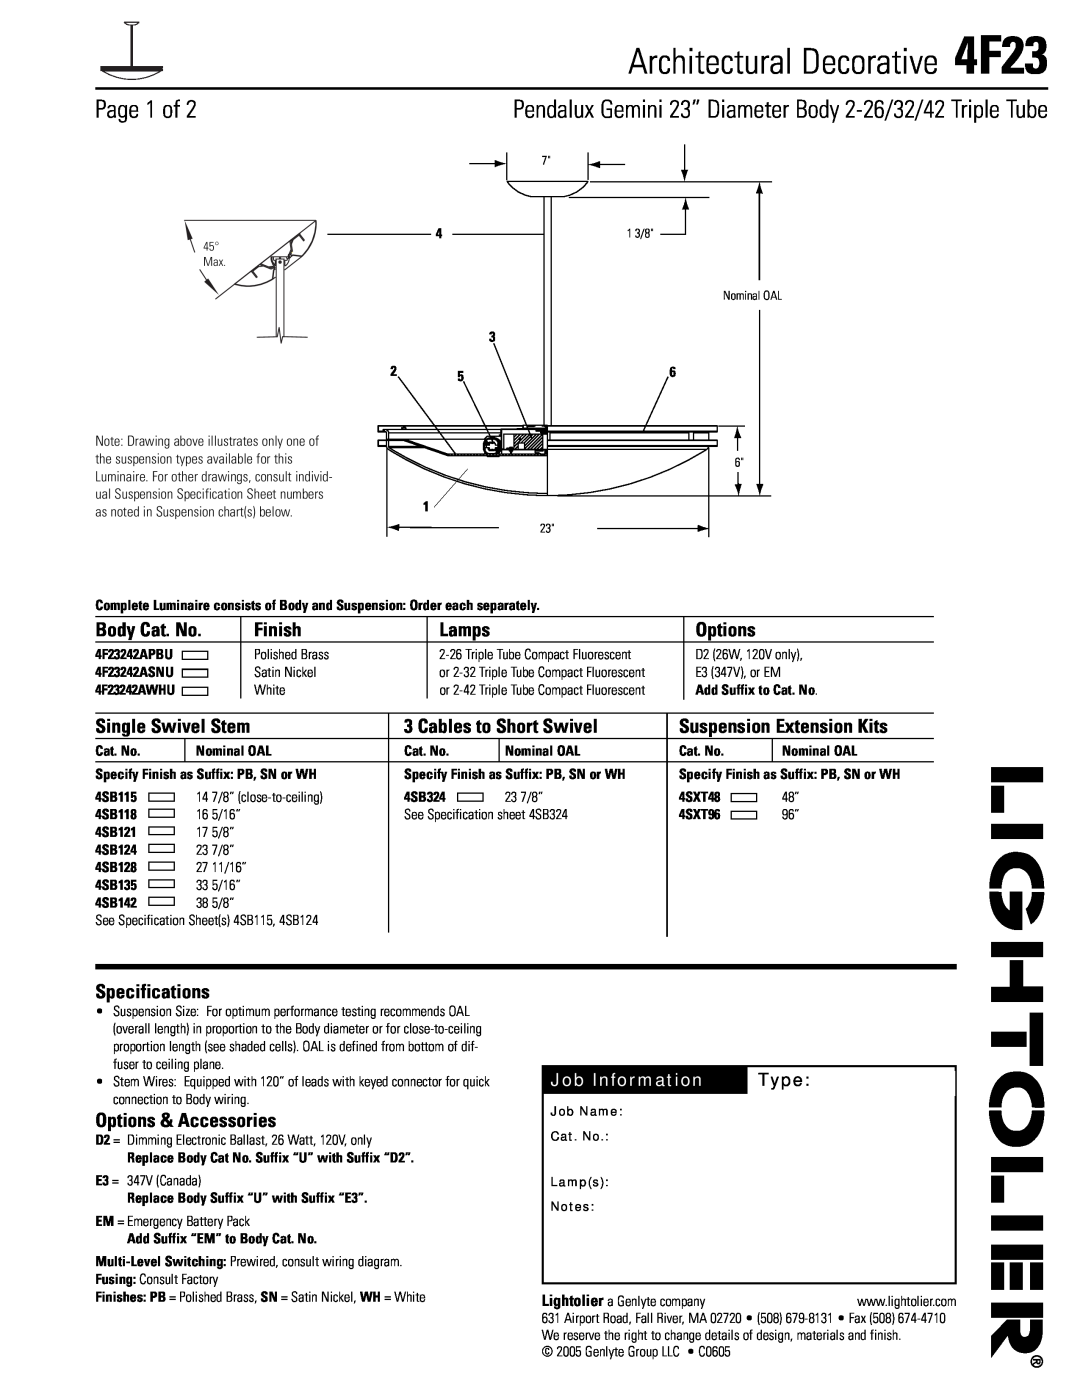 Lightolier 4F23 specifications Page 1 of, Finish, Lamps, Options, Single Swivel Stem, Cables to Short Swivel, Body Cat. No 